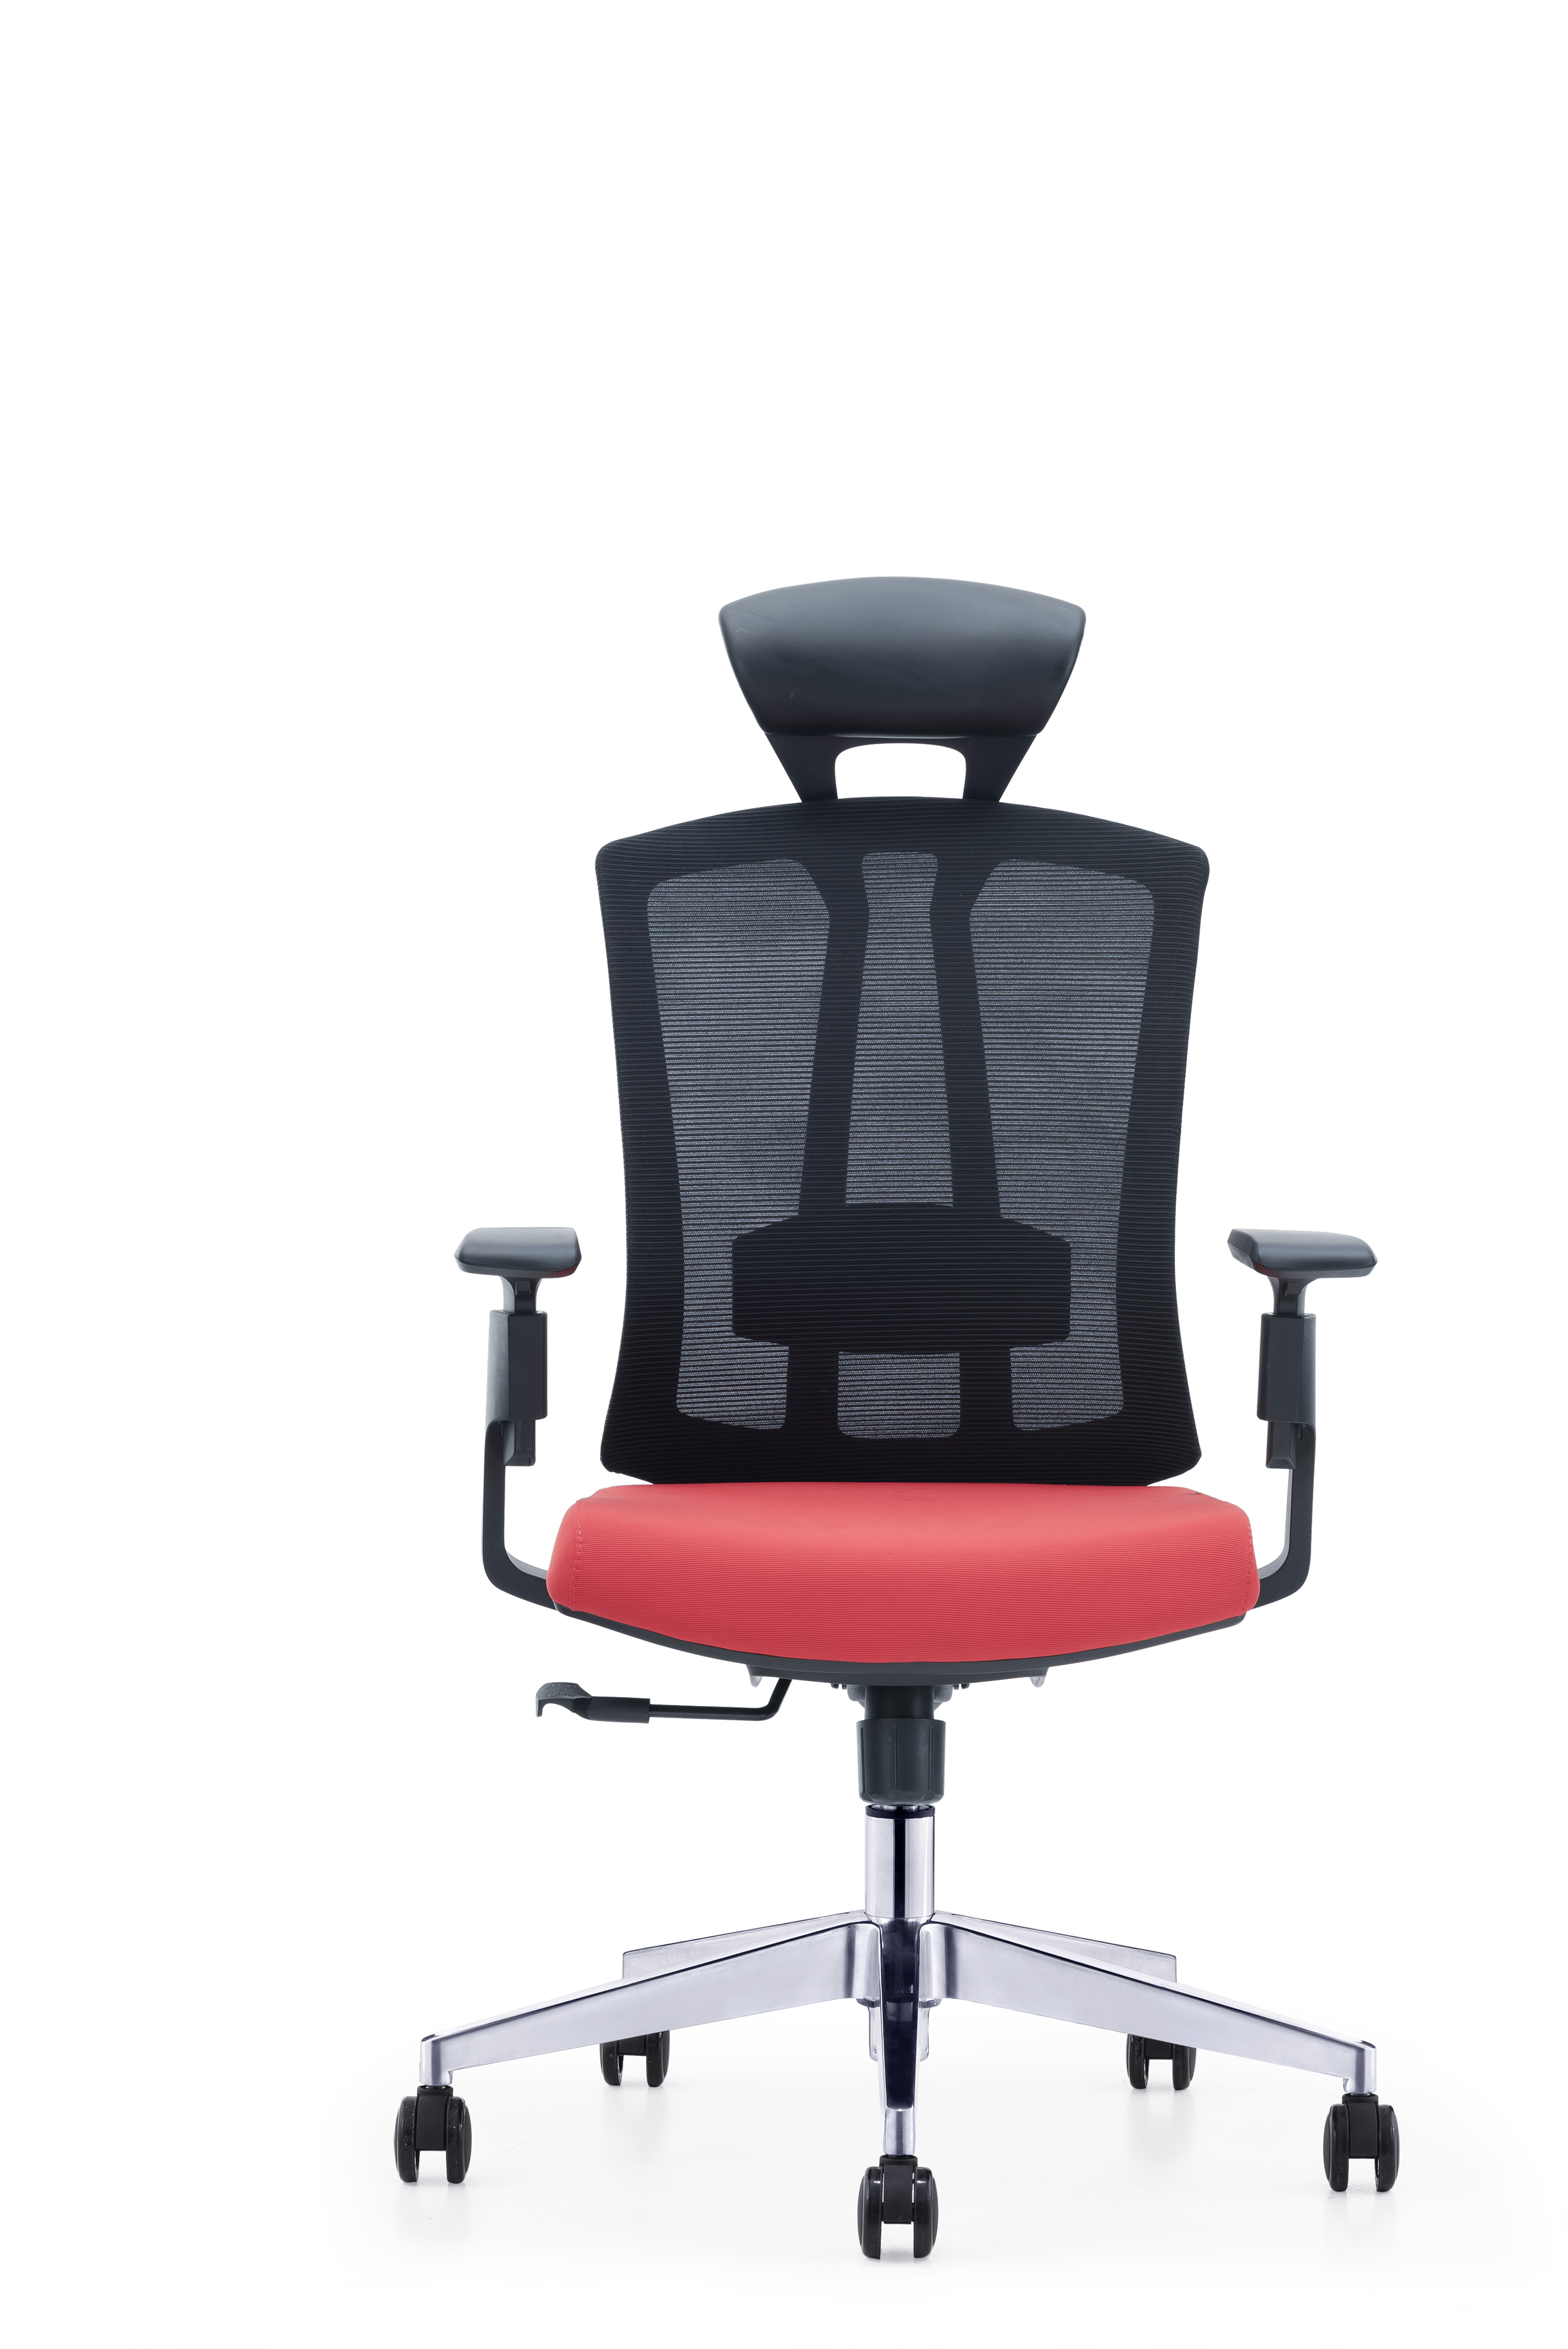 China Gold Supplier for Mesh Training Chair - CH-267A – SitZone